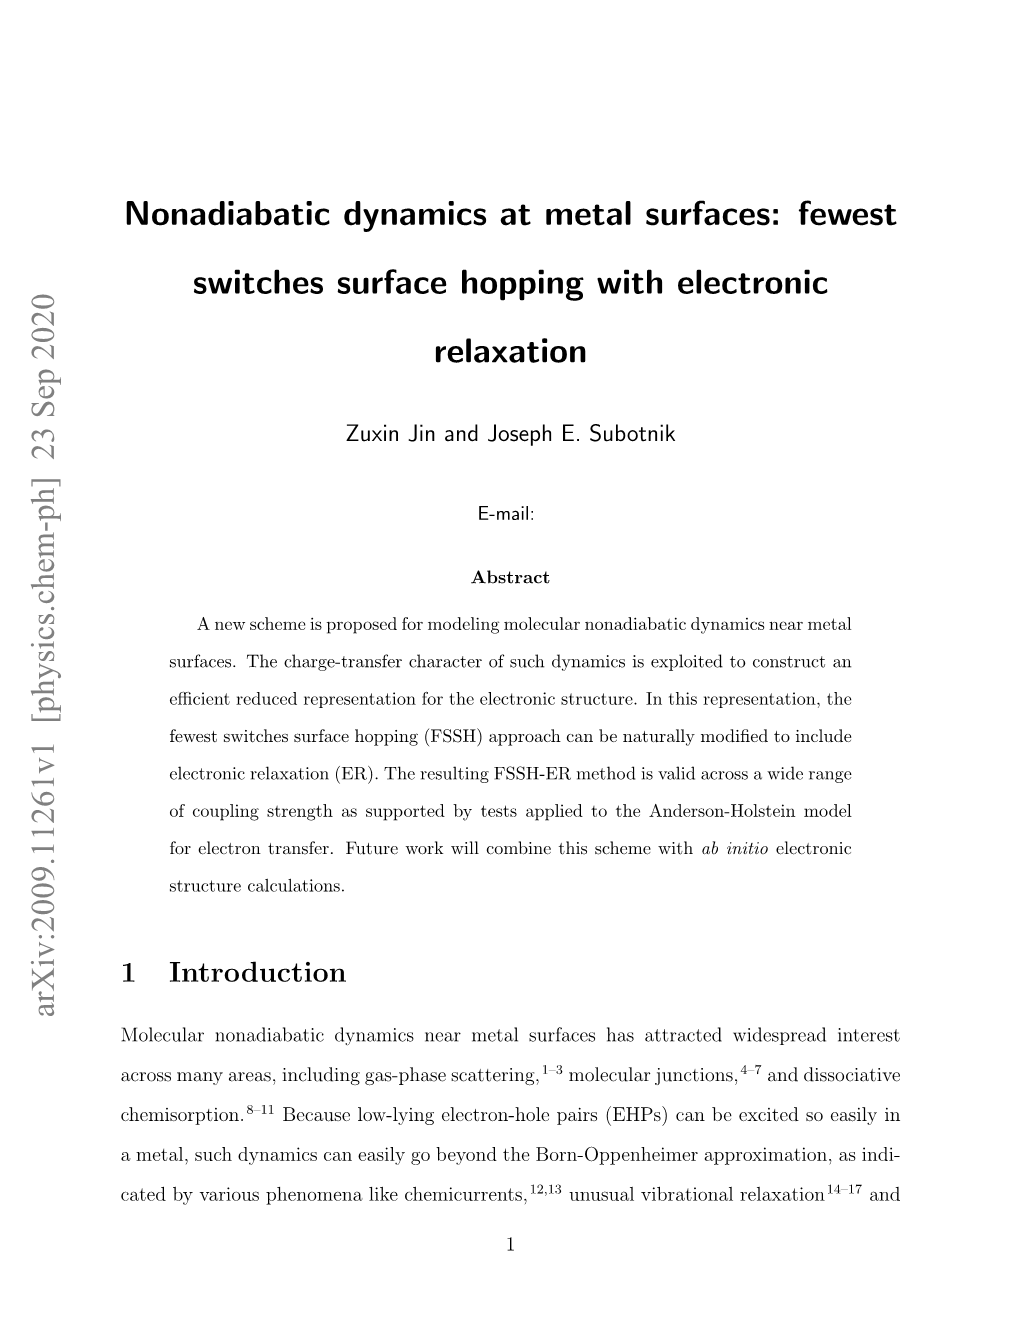 Nonadiabatic Dynamics at Metal Surfaces: Fewest Switches Surface Hopping with Electronic Relaxation Arxiv:2009.11261V1 [Physics